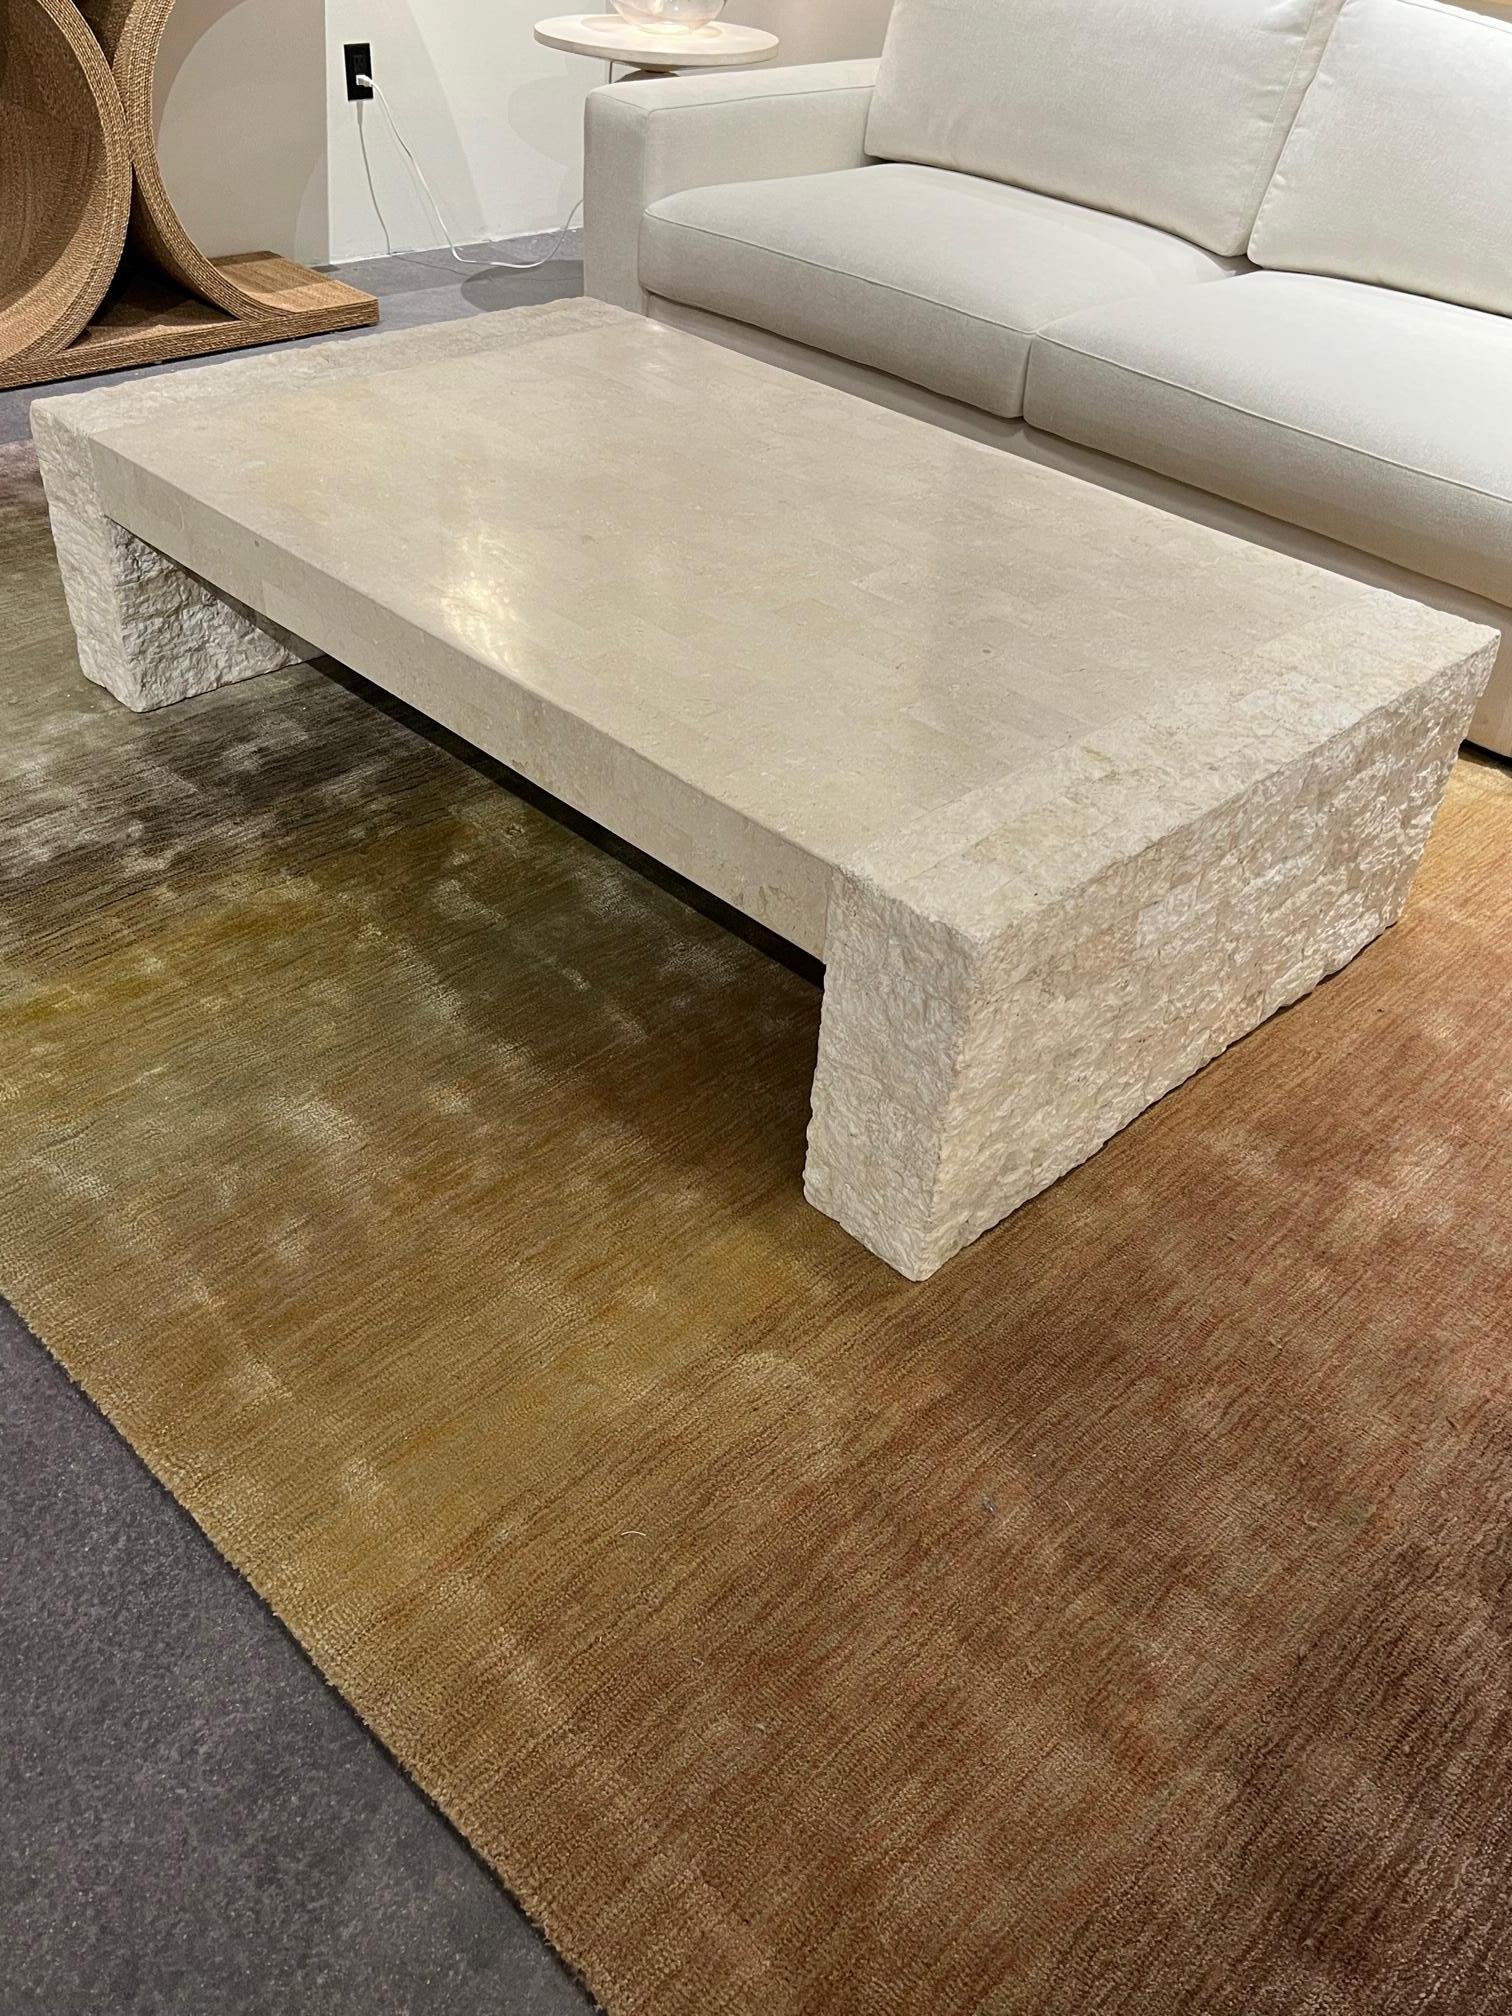 The table uses fossilized stone in its raw form and as an inlay. Combining the textures makes this piece unique. This is a one of kind piece, not from production.